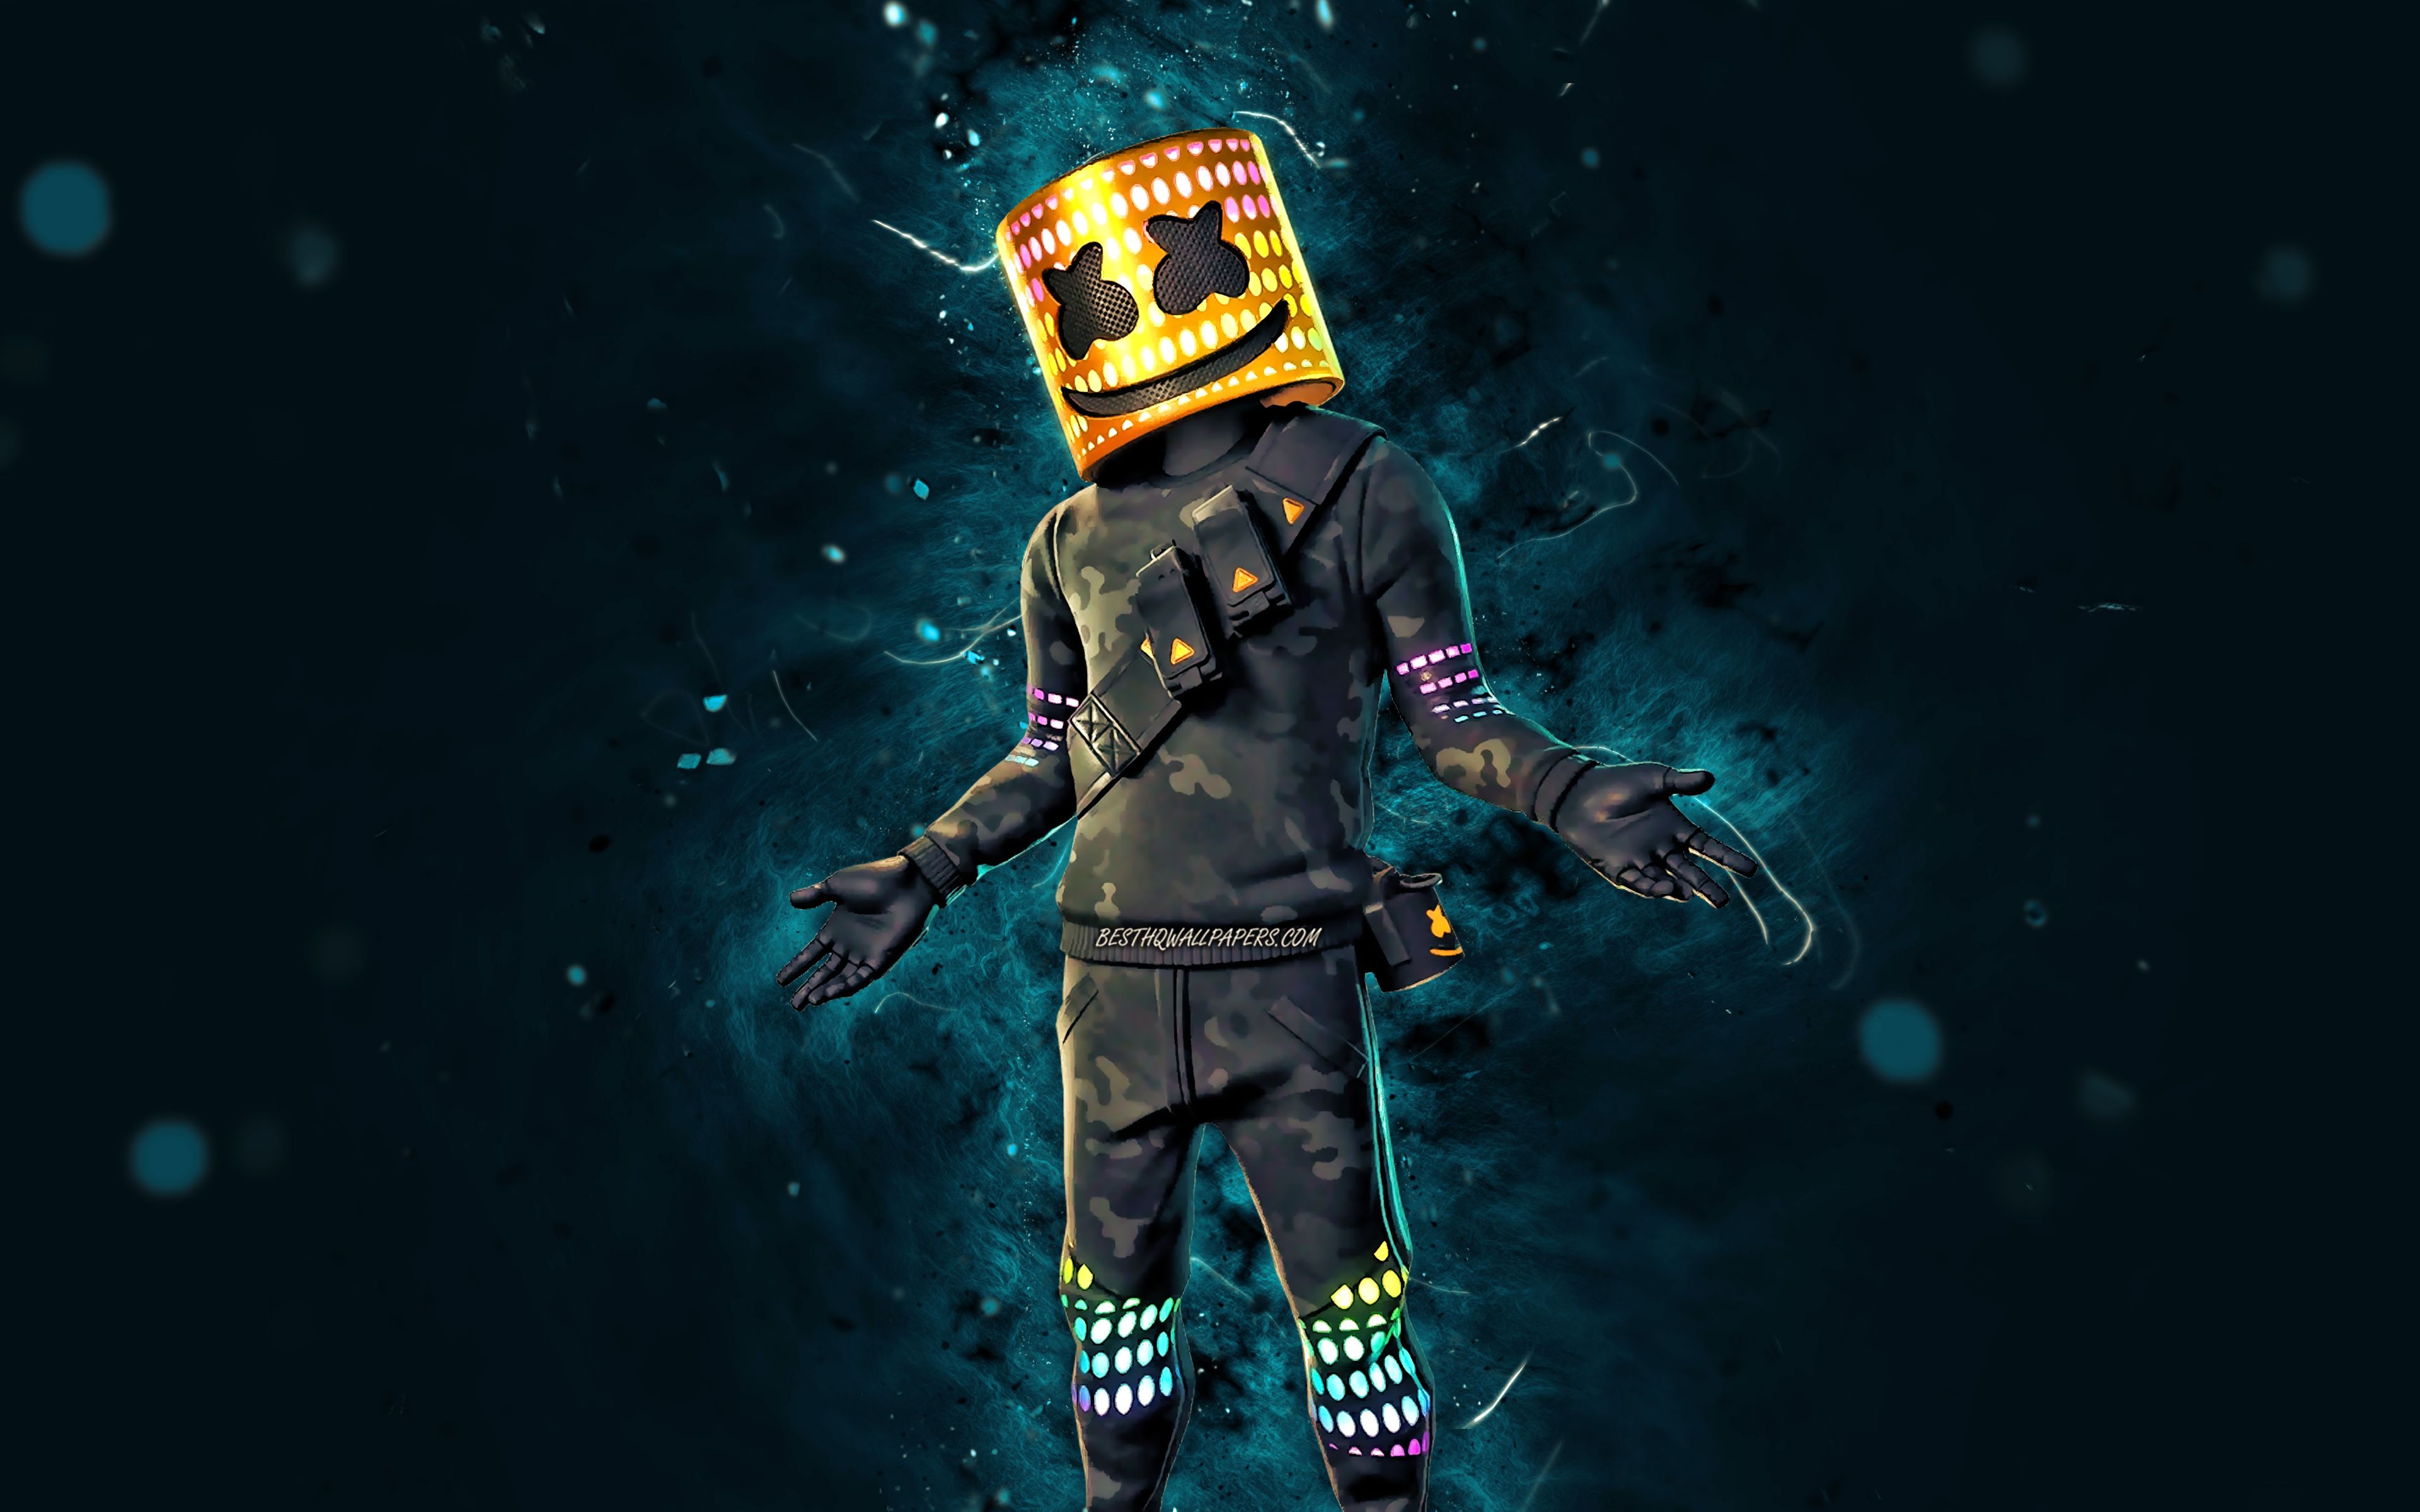 Download wallpaper Toasted Reactive Marshmello, 4k, blue neon lights, Fortnite Battle Royale, Fortnite characters, Toasted Reactive Marshmello Skin, Fortnite, Toasted Reactive Marshmello Fortnite for desktop with resolution 3840x2400. High Quality HD